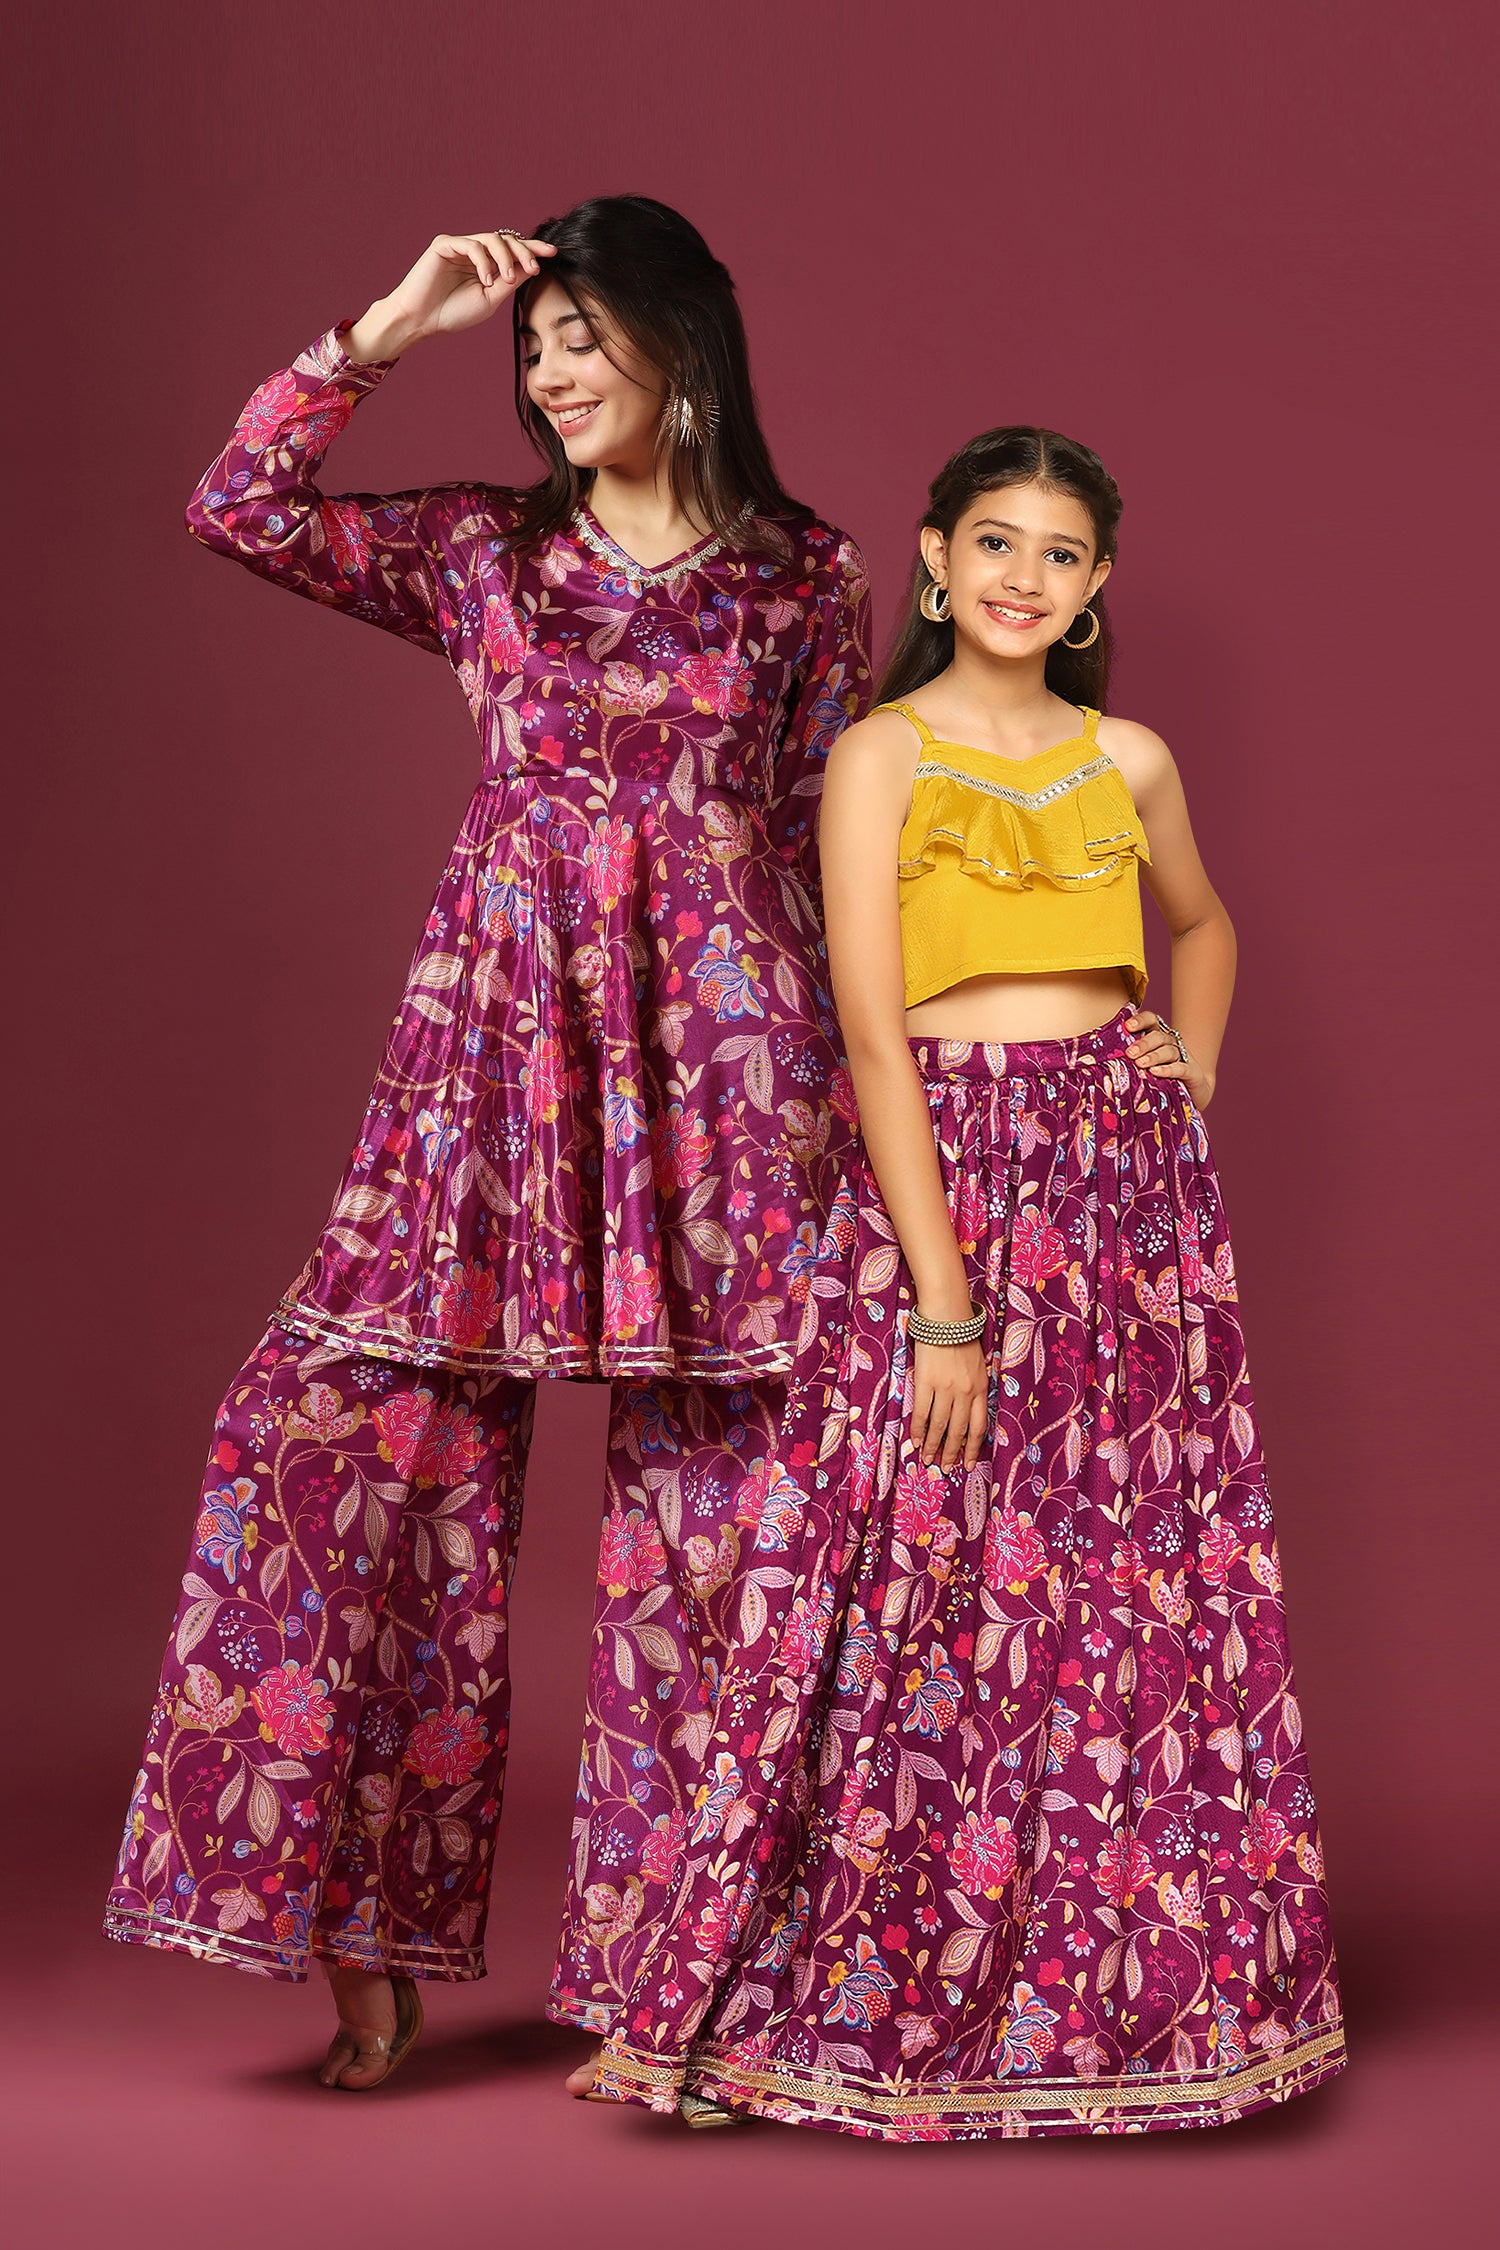 combo dress / matching outfits for mother daughter | Mother daughter dress, Mother  daughter fashion, Mother daughter dresses matching